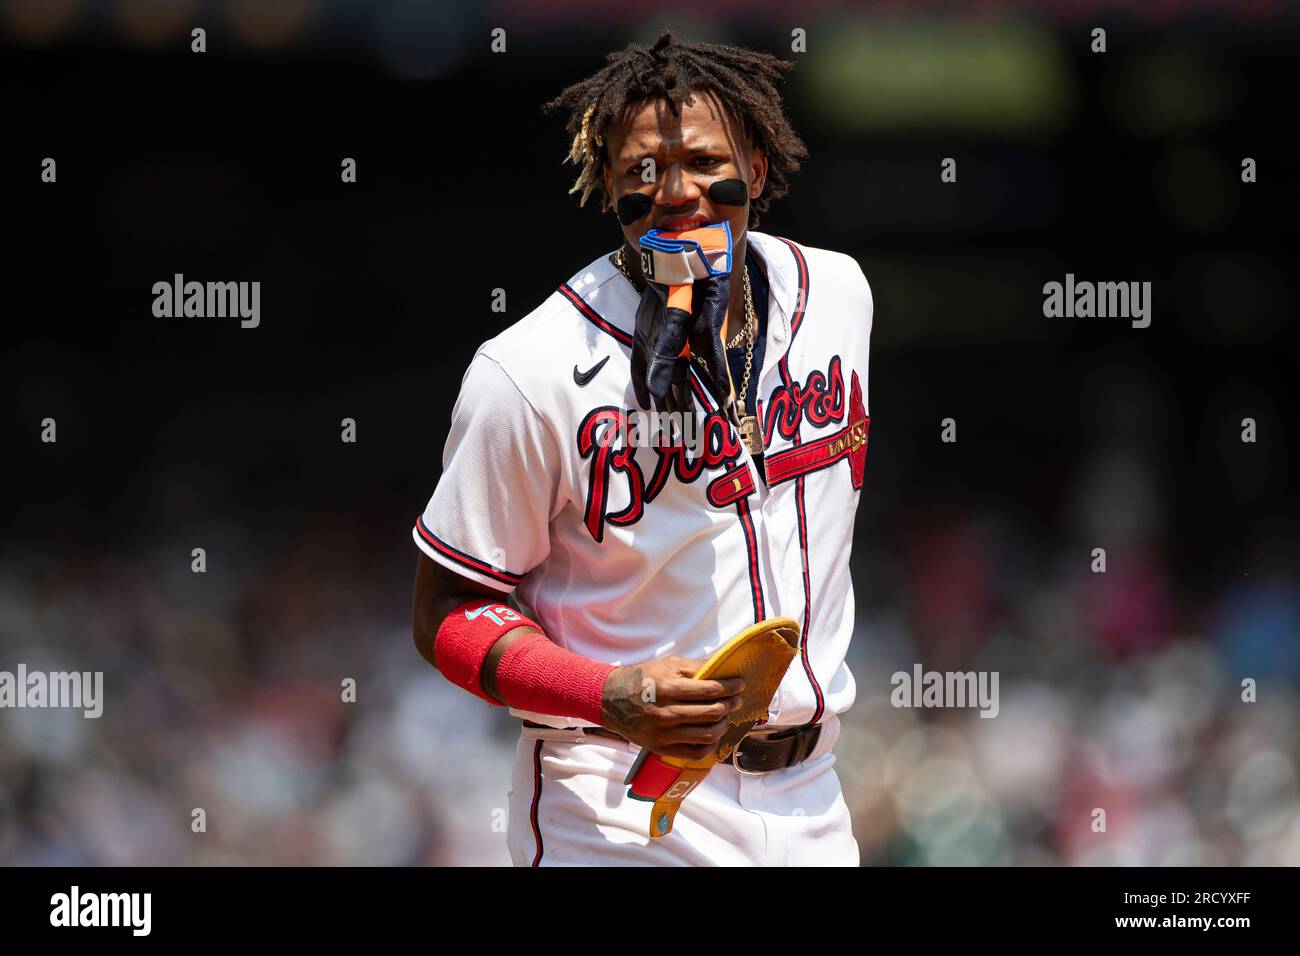 16,818 Ronald Acuna Photos & High Res Pictures - Getty Images